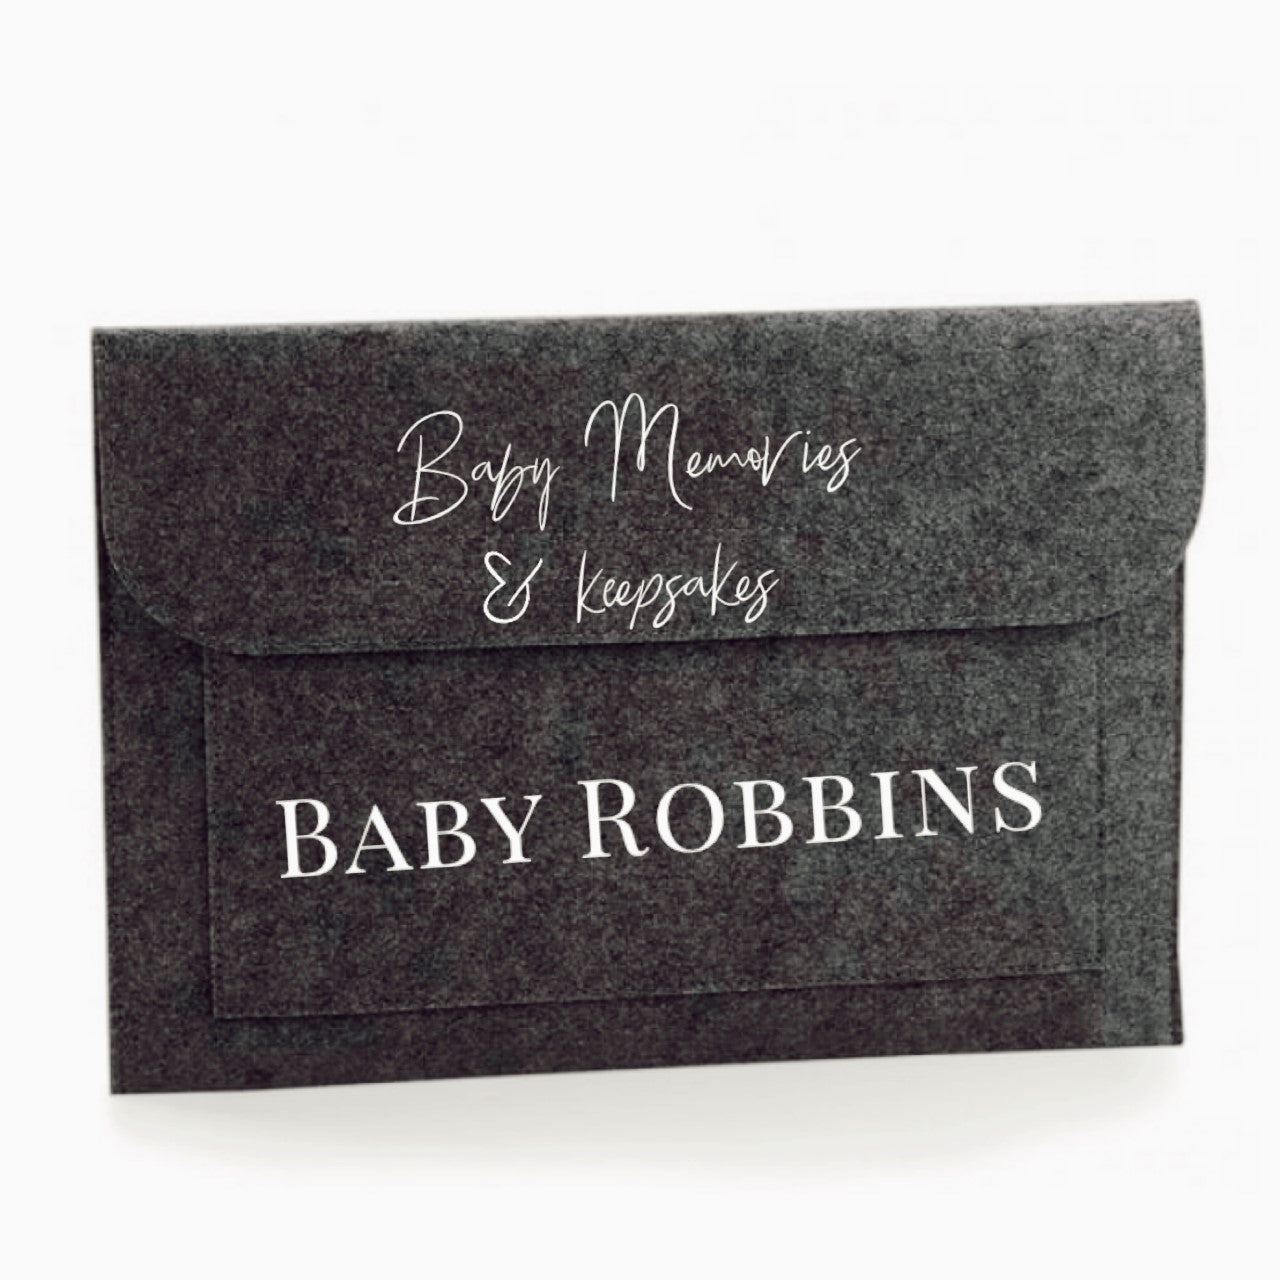 Personalised occasional folder, newly engaged, new parents, new job & more perfect gift